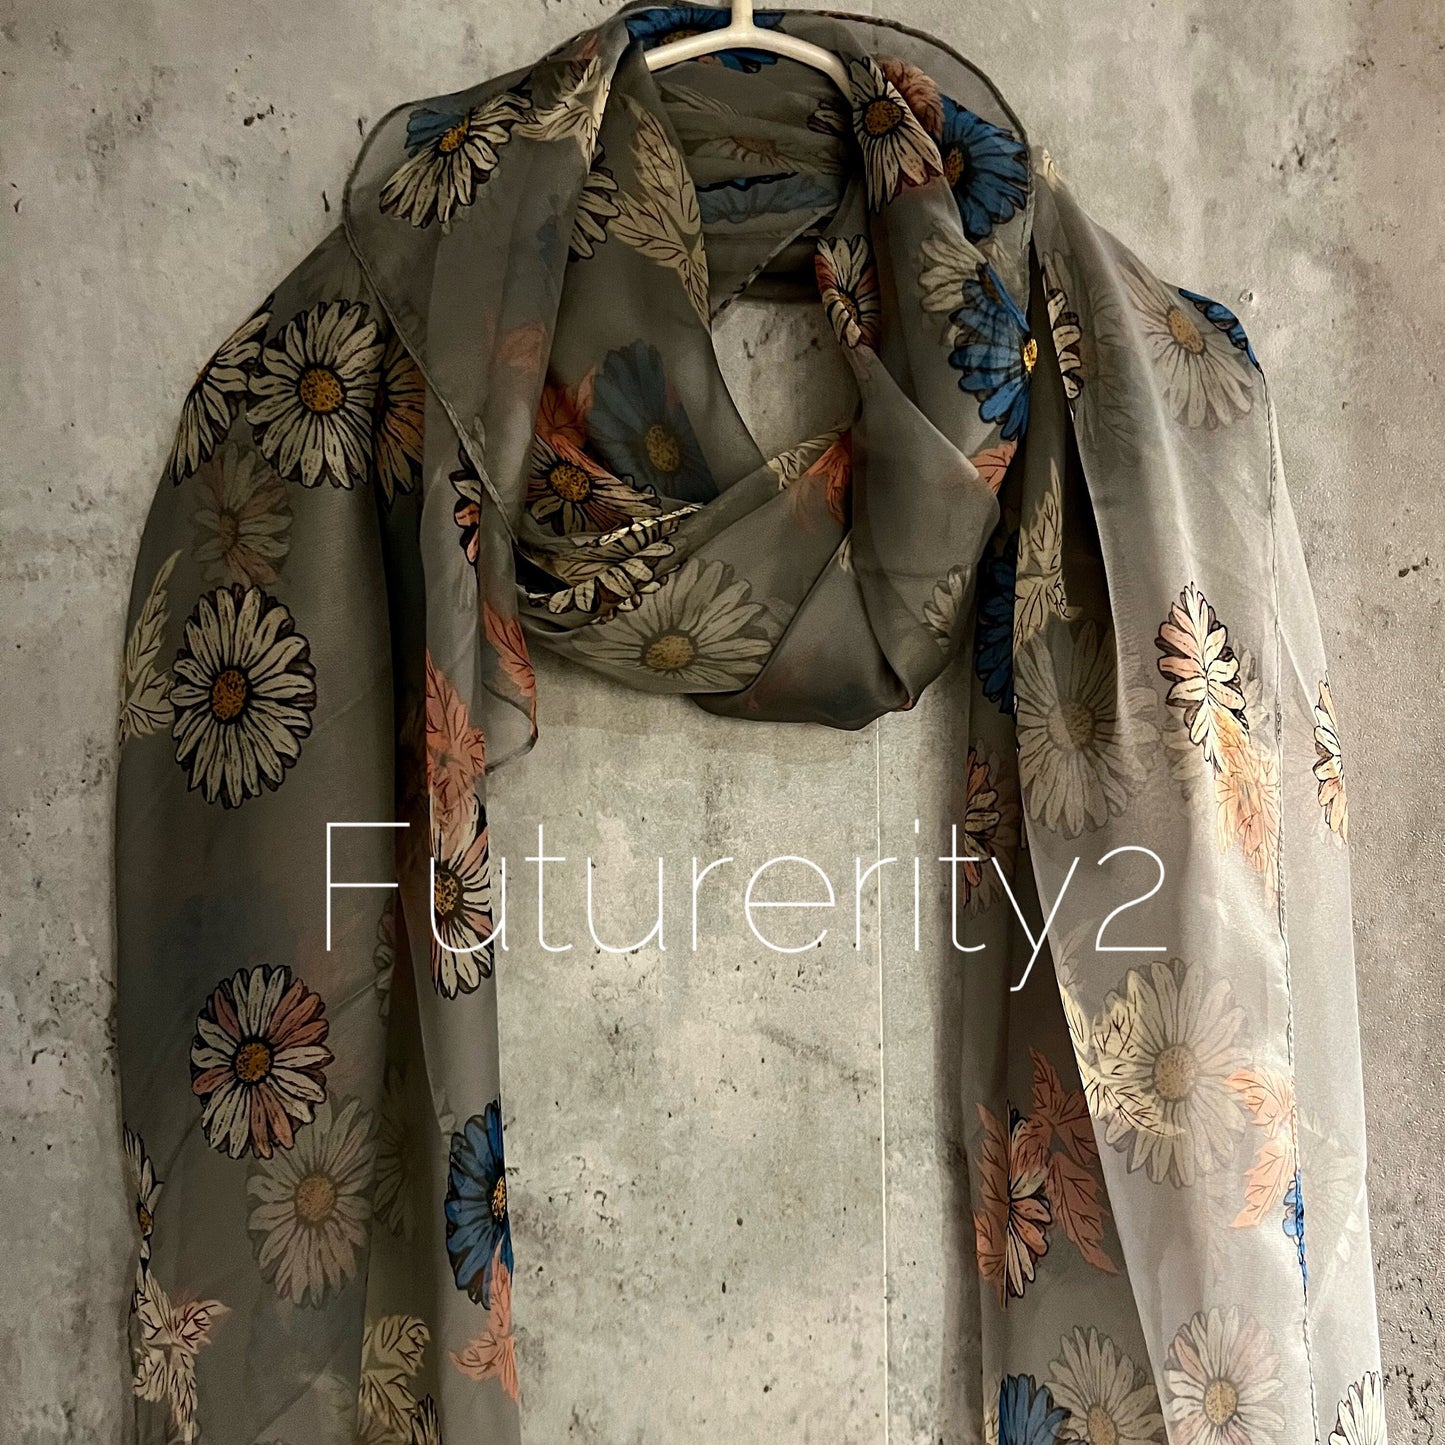 Daisy Flowers Pattern Grey Silk Scarf/Spring Summer Autumn Scarf/Gifts For Her Birthday Christmas/Gifts For Mum/Wedding Scarf/Evening Scarf